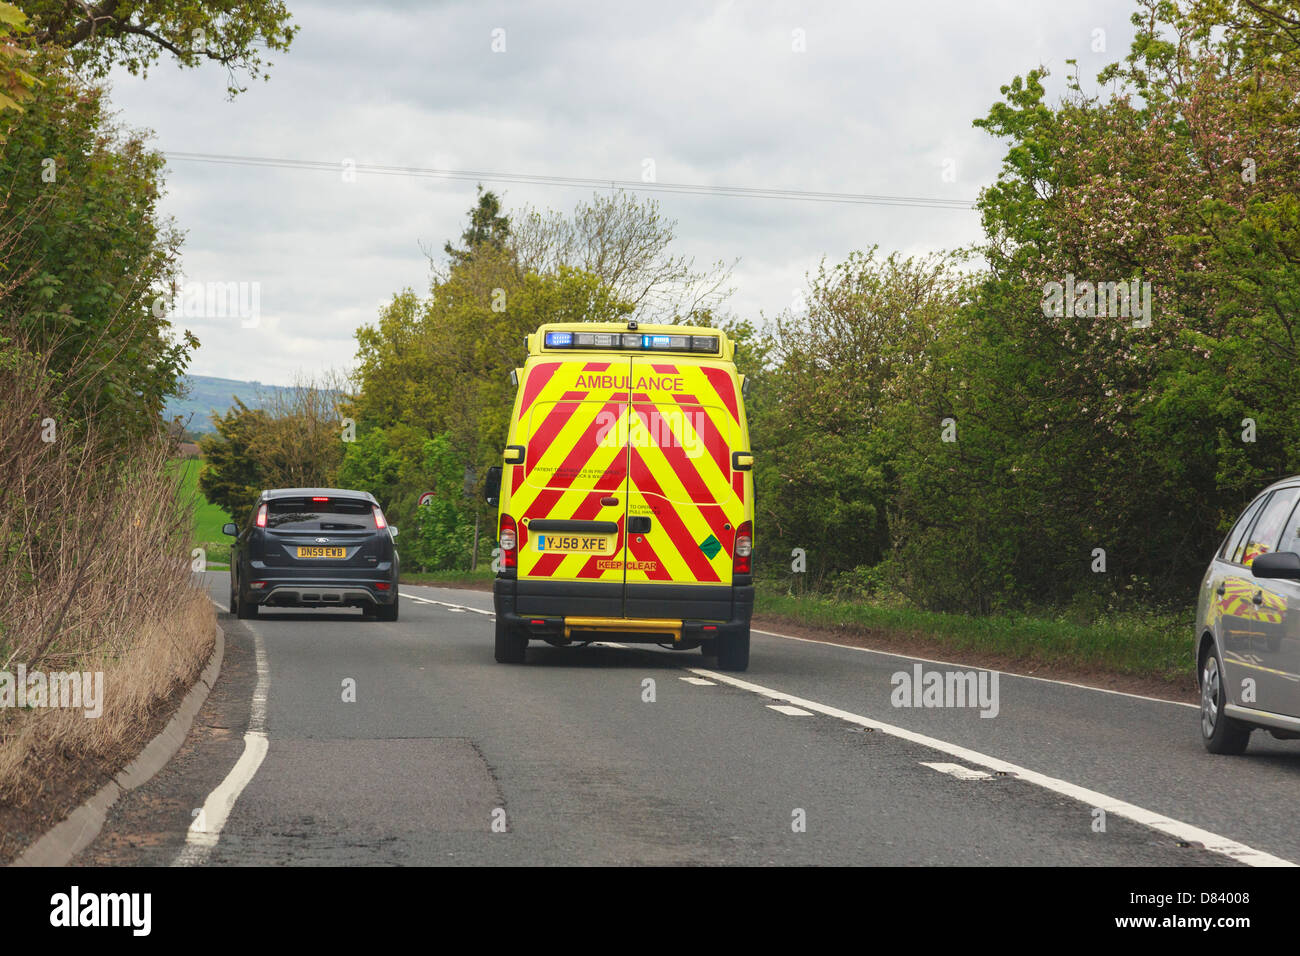 View through a windscreen of an ambulance with blue lights flashing rushing to an emergency overtaking a car along a main road. Shropshire England UK Stock Photo